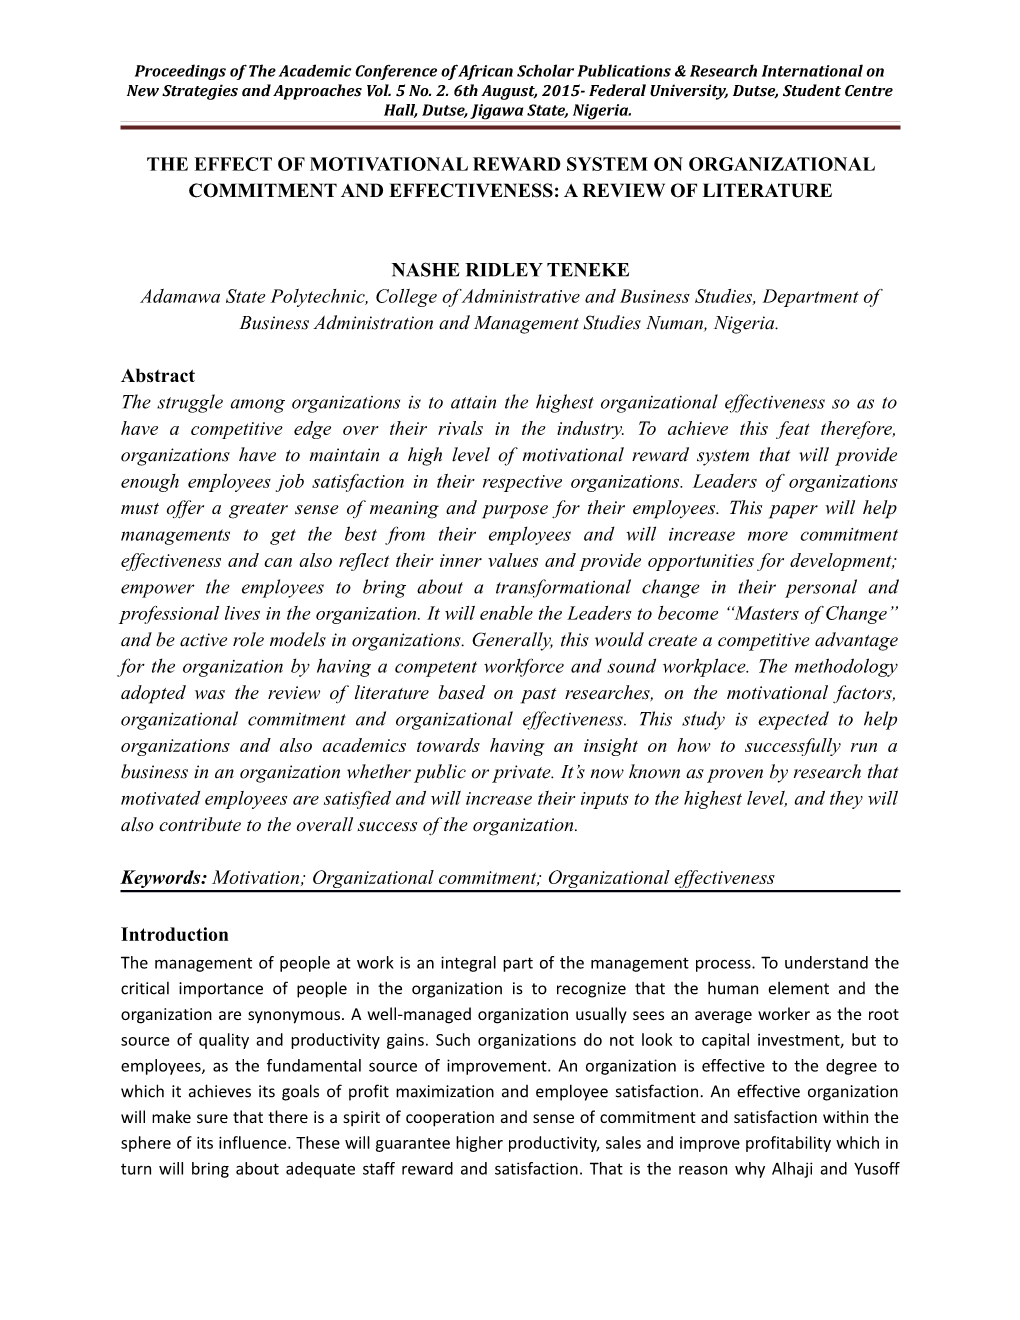 The Effect of Motivational Reward System on Organizational Commitment and Effectiveness: a Review of Literature